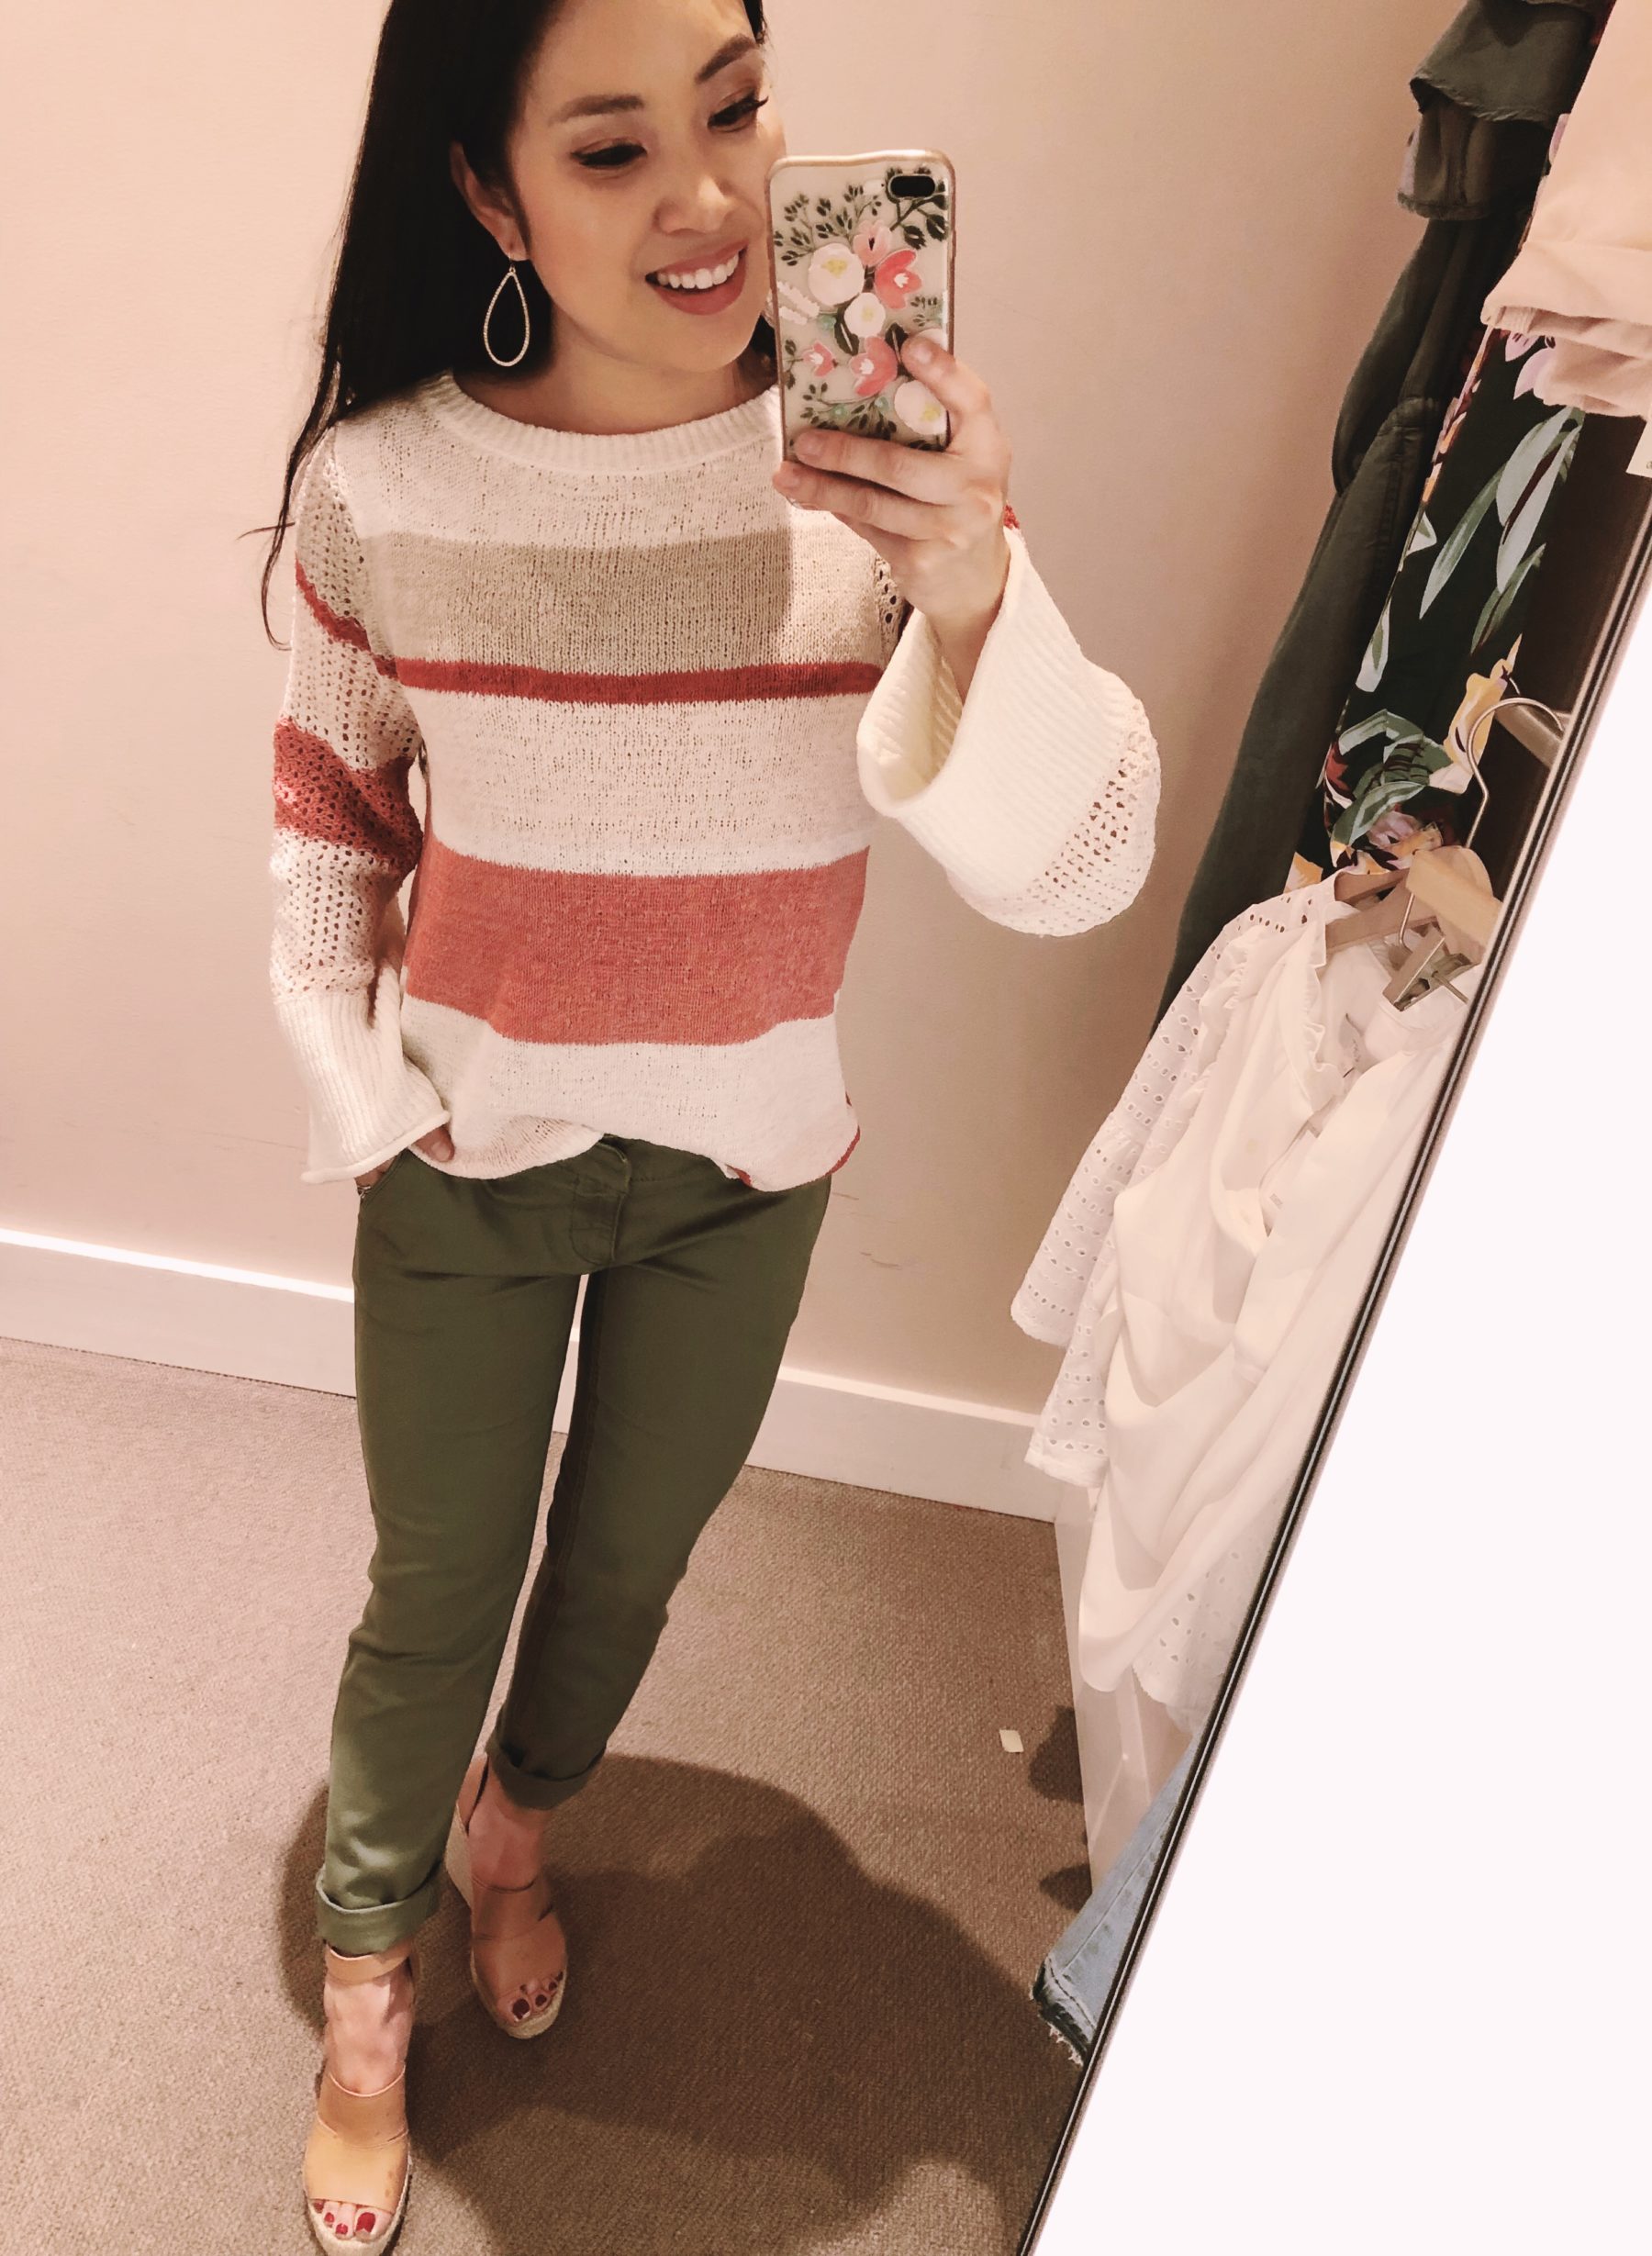 cute & little | dallas petite fashion blog | loft dressing room try on review | striped stitched sleeve sweater, girlfriend chinos | spring outfit - LOFT Dressing Room Try-On by popular Dallas petite fashion blogger, cute & little